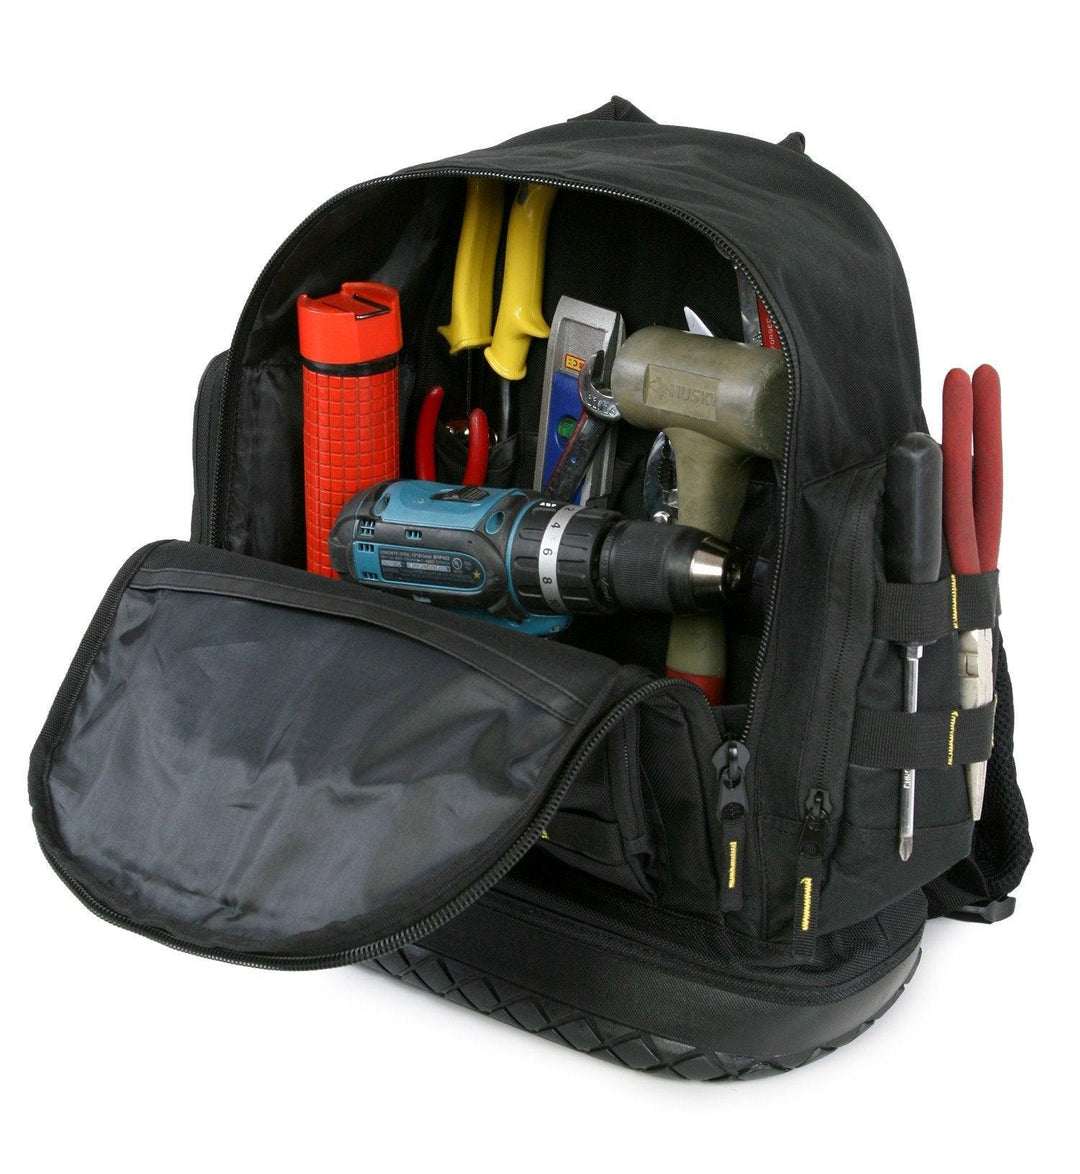 Extreme Duty Jobsite Backpack